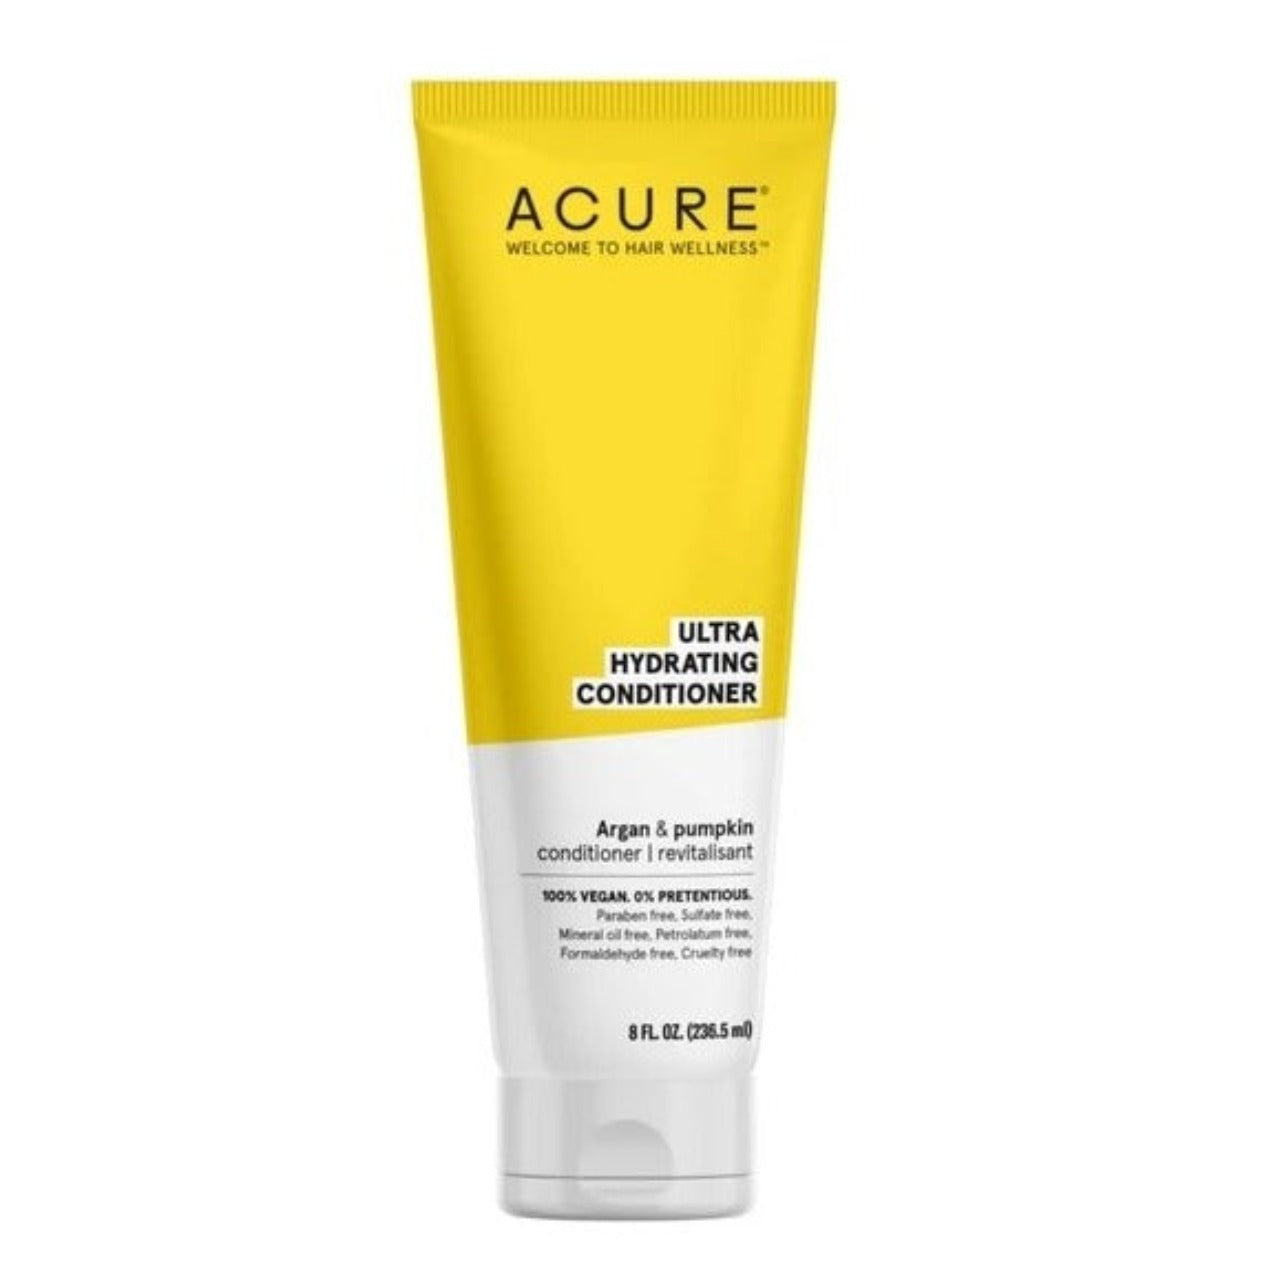 Ultra Hydrating Conditioner by Acure